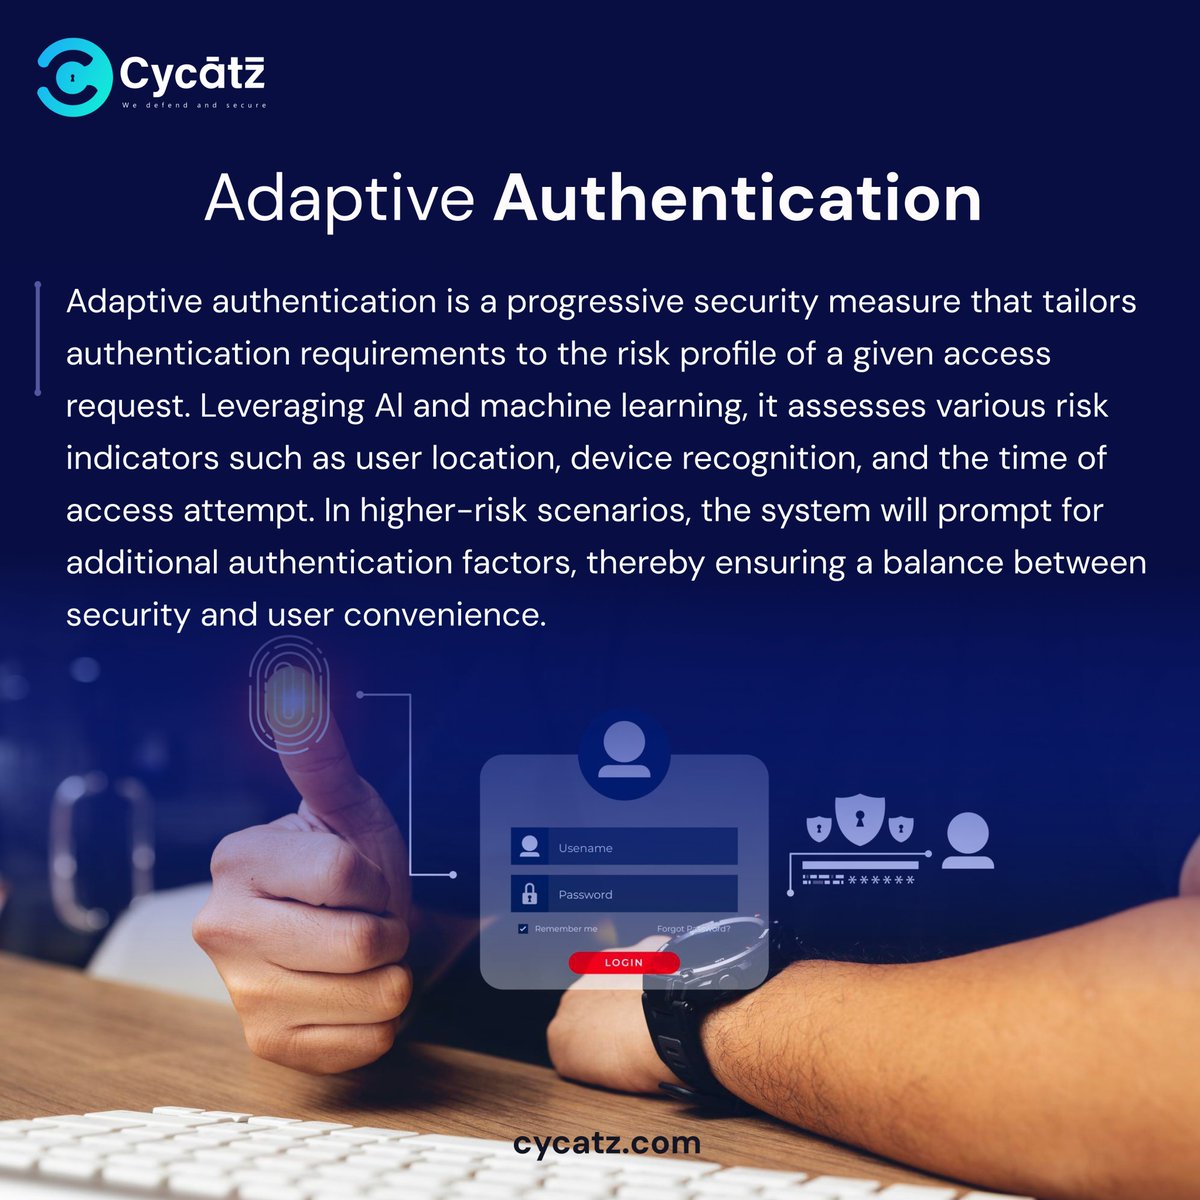 #CyCatz #Cybersecurity Adaptive Authentication

#cyberawareness #cyberattack #breaches #databreaches #cybercrime #darkwebmonitoring #SurfaceWebMonitoring #mobilesecurity #emailsecurity #vendorriskmanagement #BrandMonitoring #authentication